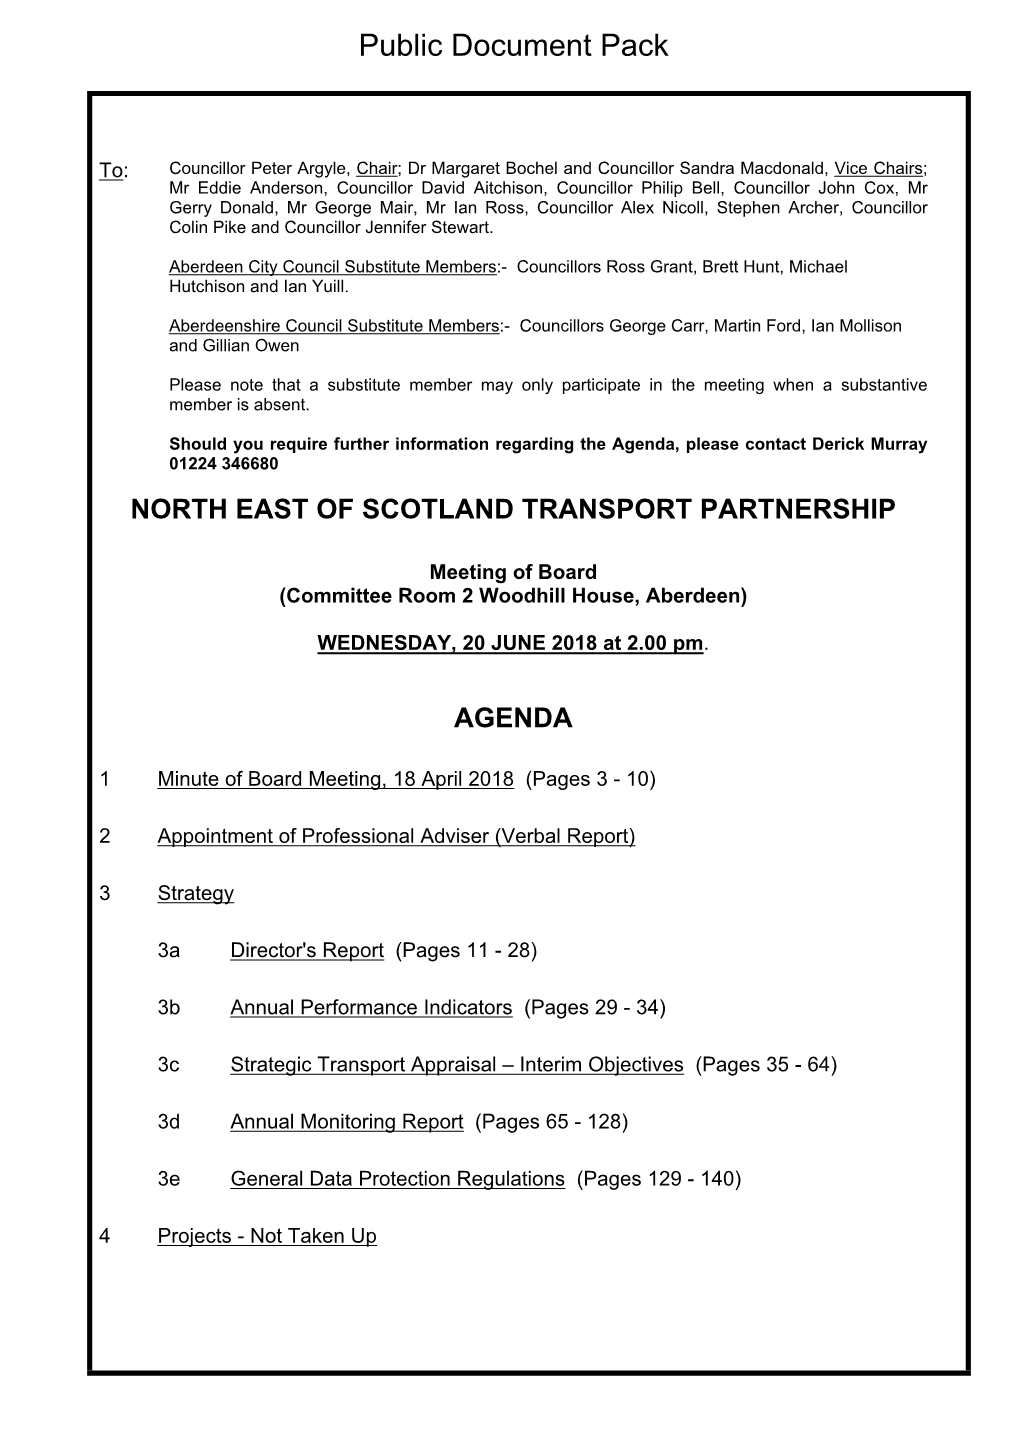 (Public Pack)Agenda Document for North East of Scotland Transport